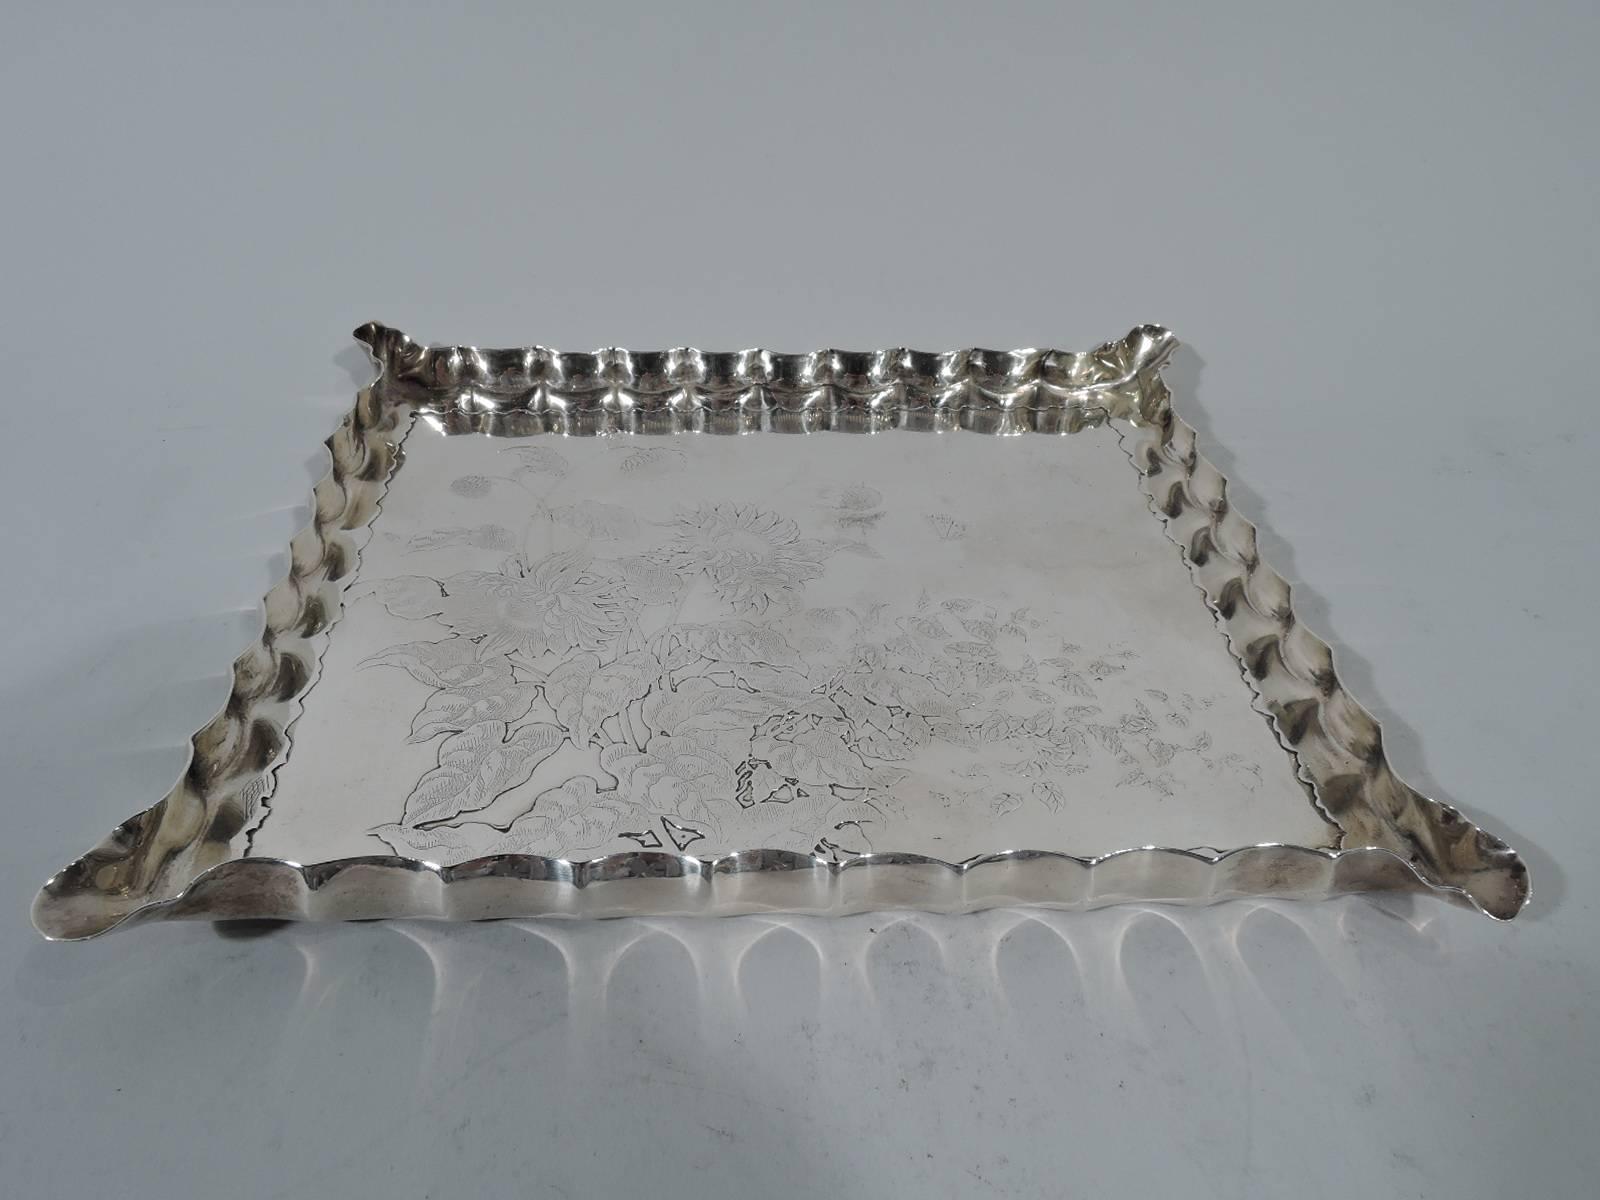 Japonesque sterling silver tray. Made by Gorham in Providence, ca 1885. Rectangular with applied irregular and wavy border and crimped rim. Well engraved with profusion of flowers. Hallmark includes no. 5. Weight: 9.8 troy ounces.  